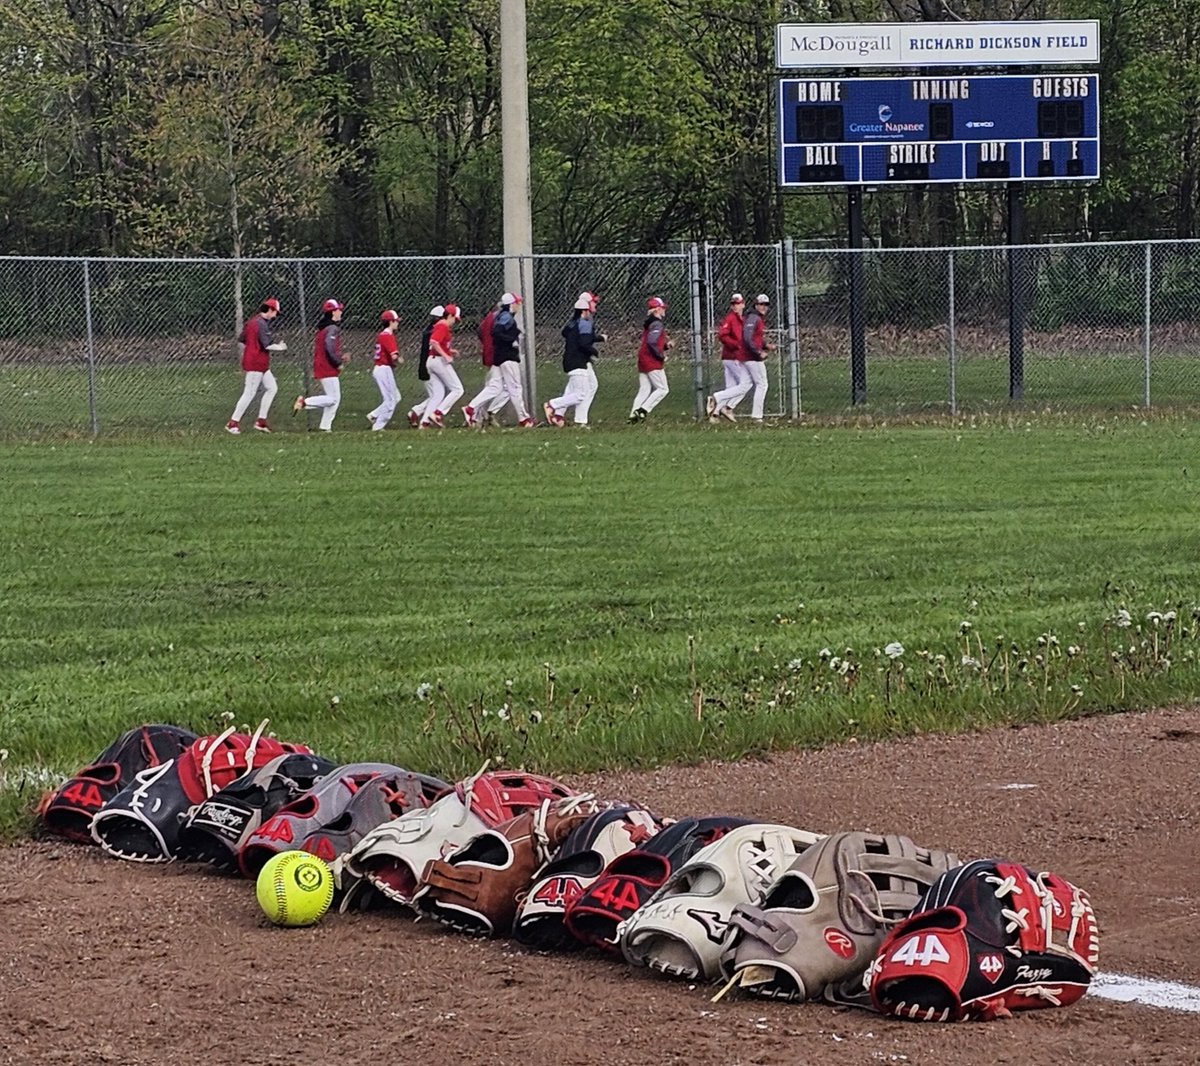 The softball season is back!! Great day today at Our U17 Tournament in Napanee.